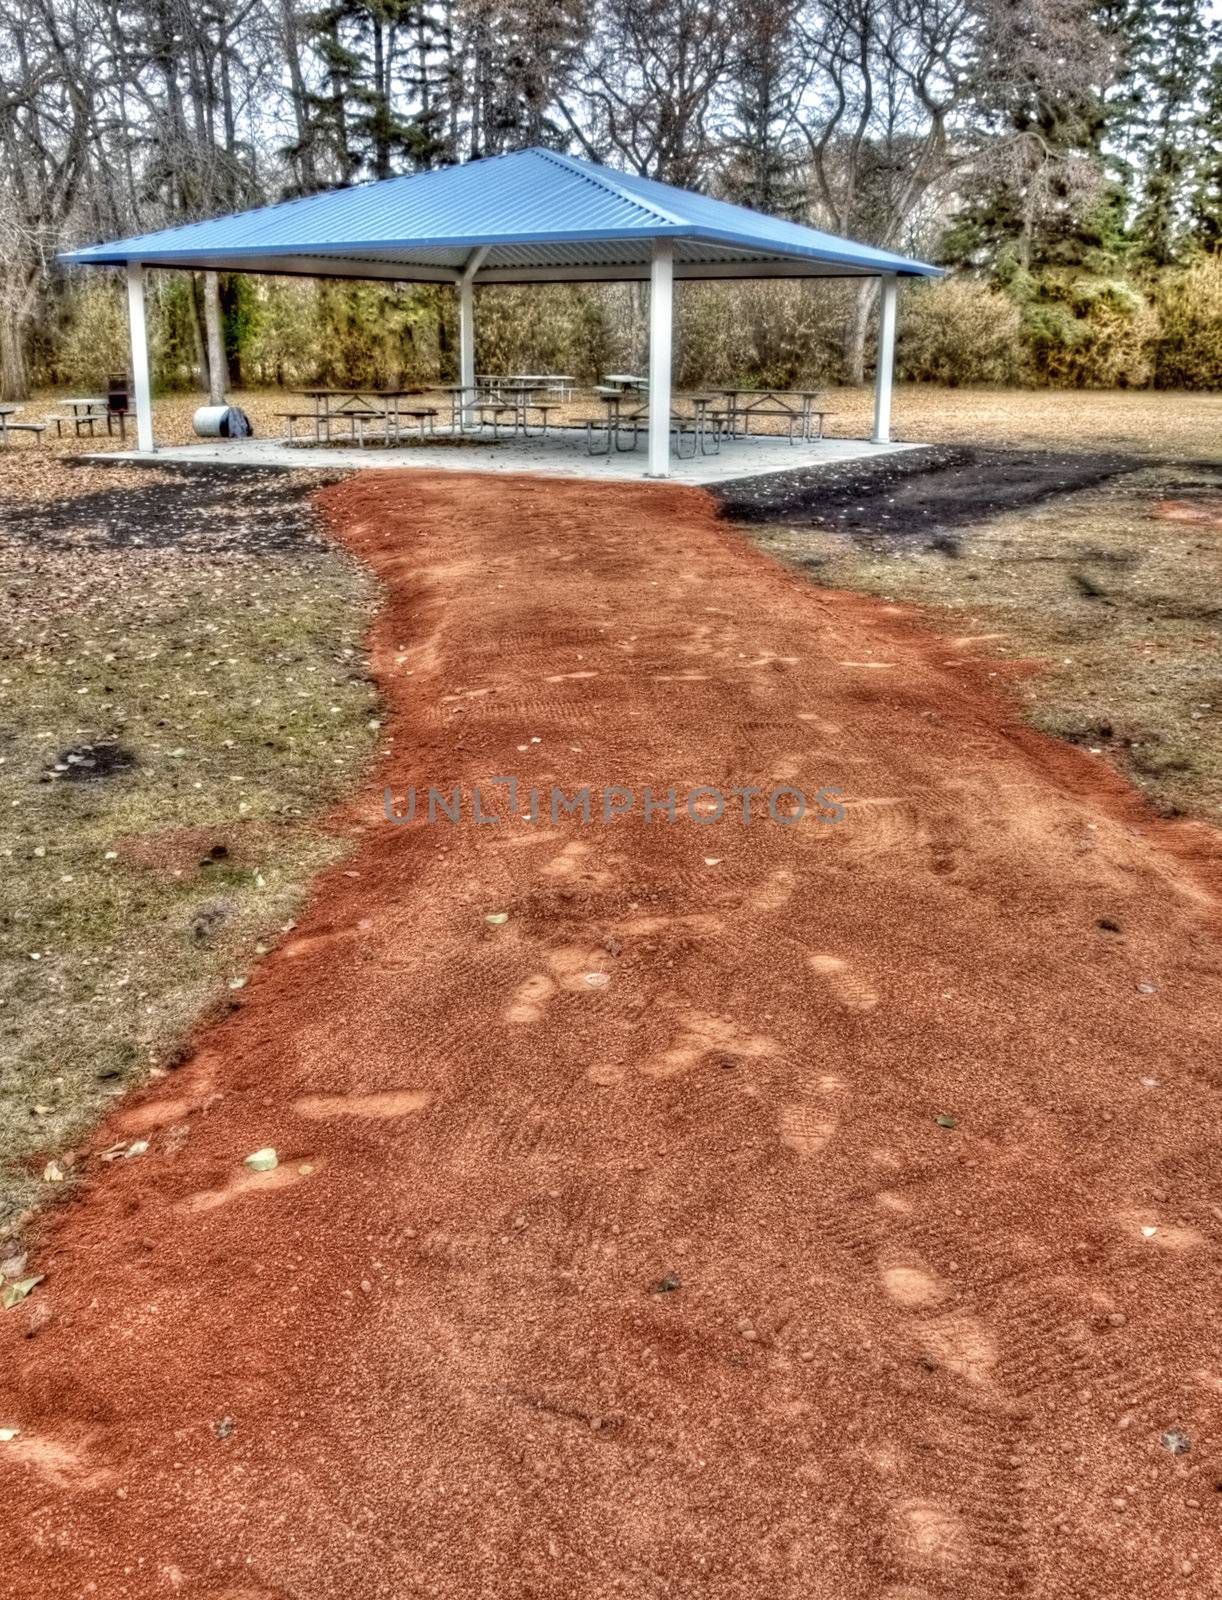 A path of red shale leading into a covered picnic structure.